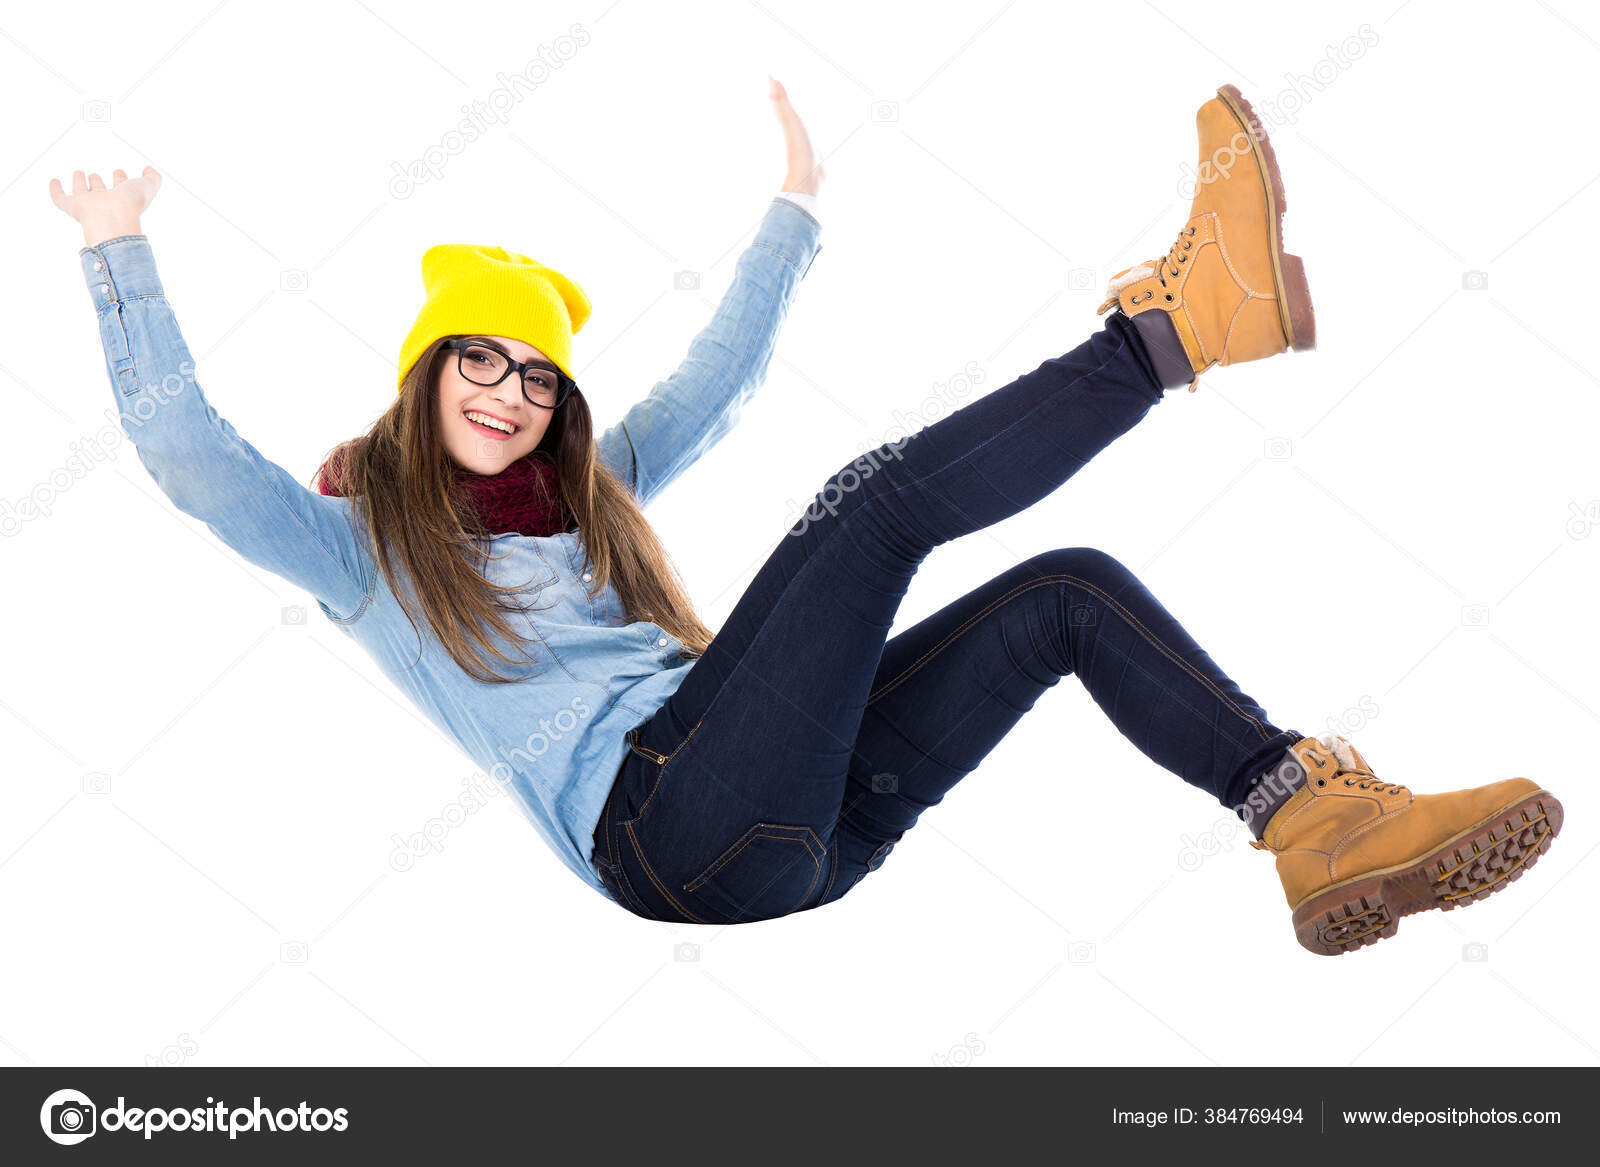 Falling down funny Stock Photos, Royalty Free Falling down funny Images |  Depositphotos